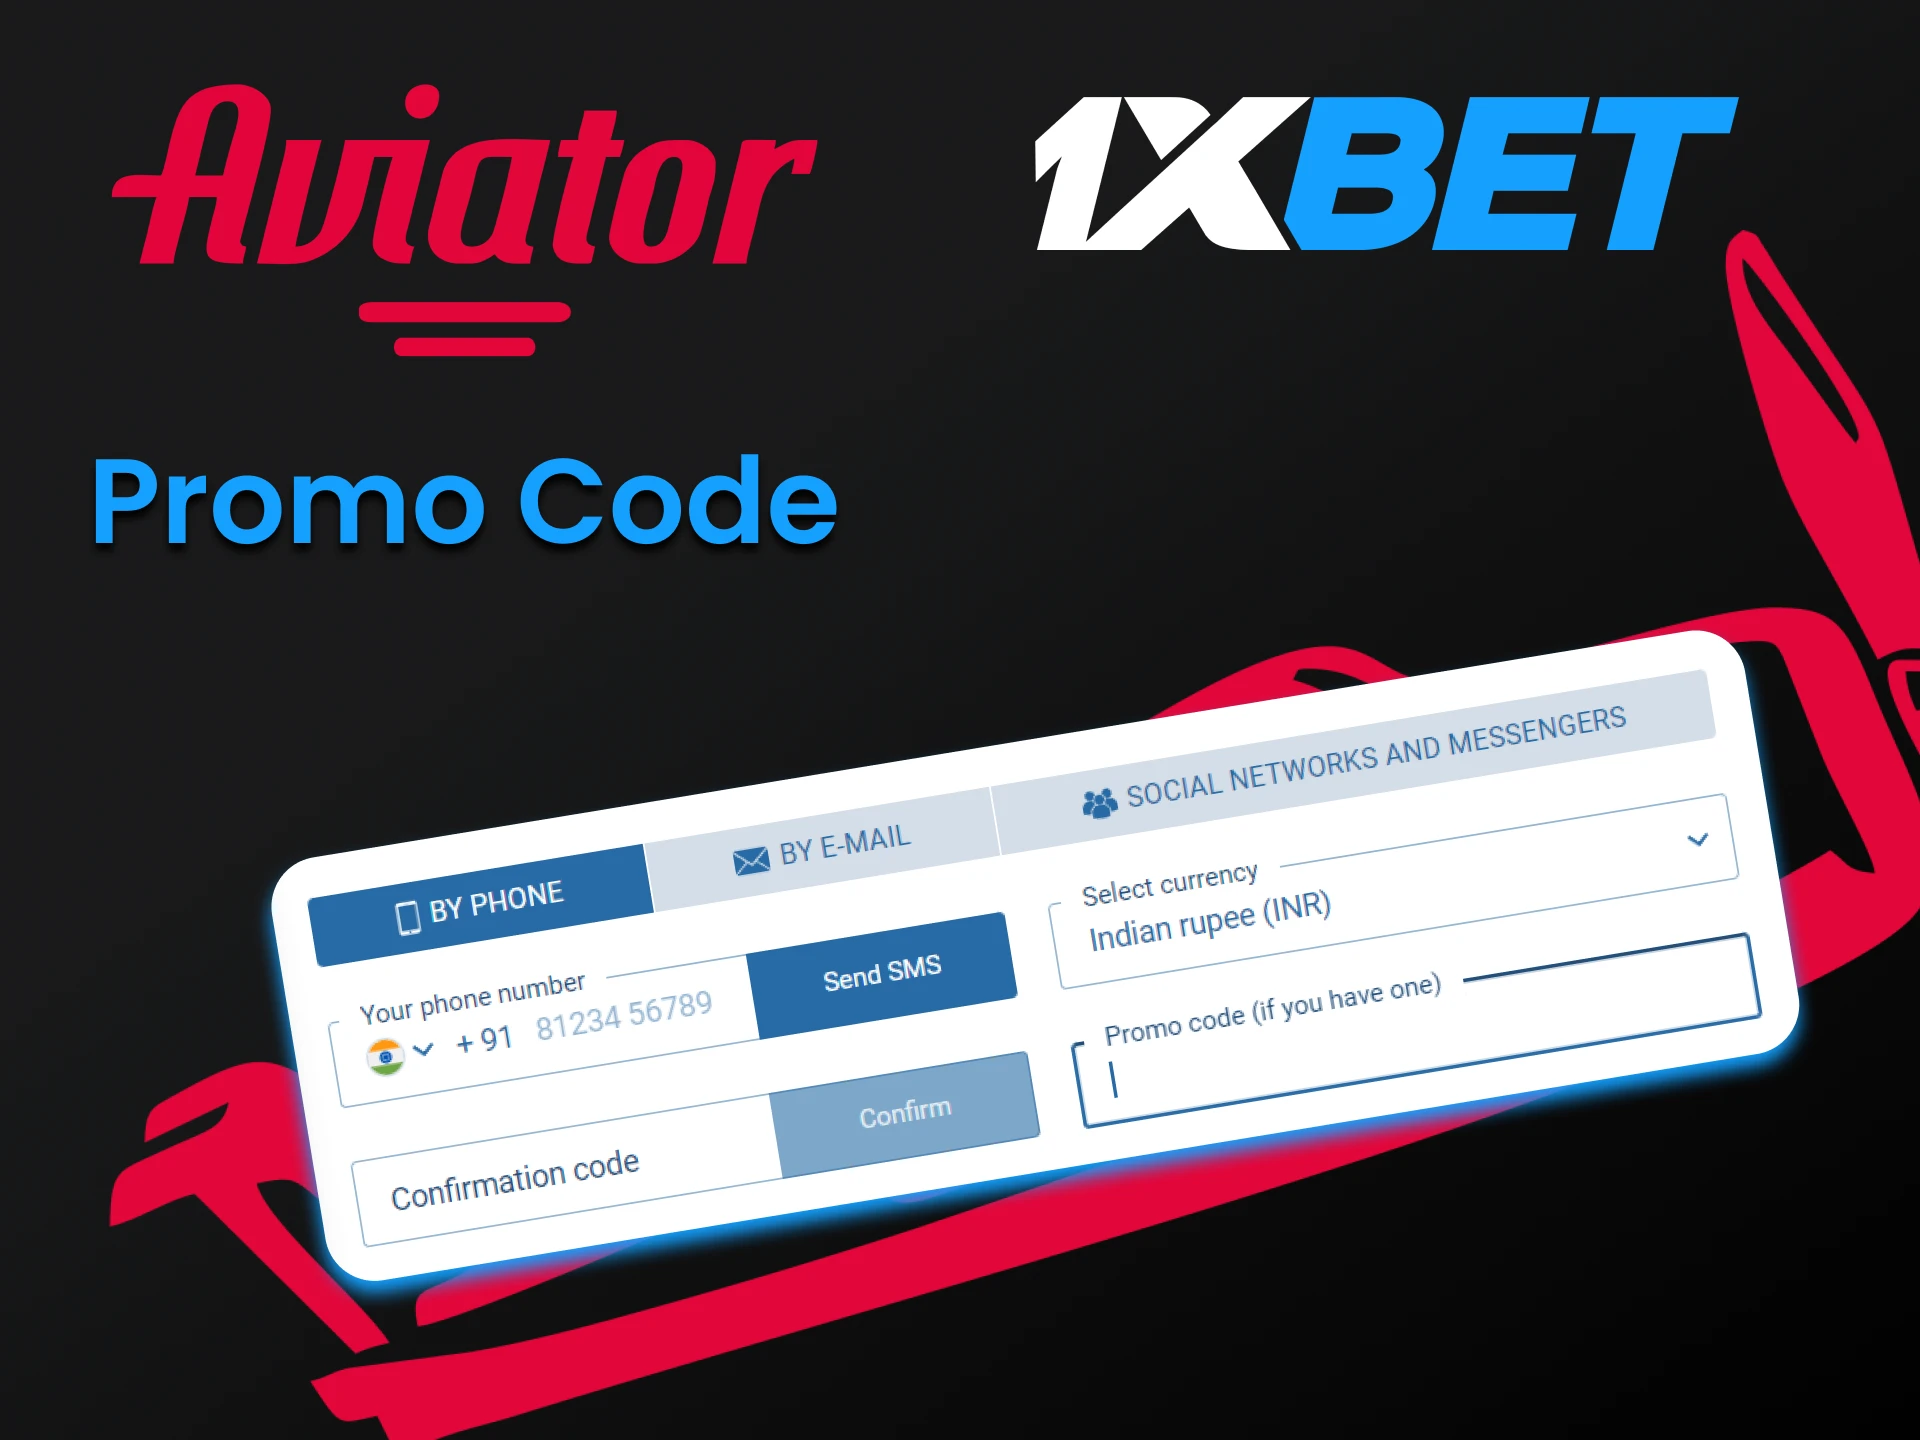 Use a special code to receive a bonus from 1xbet.